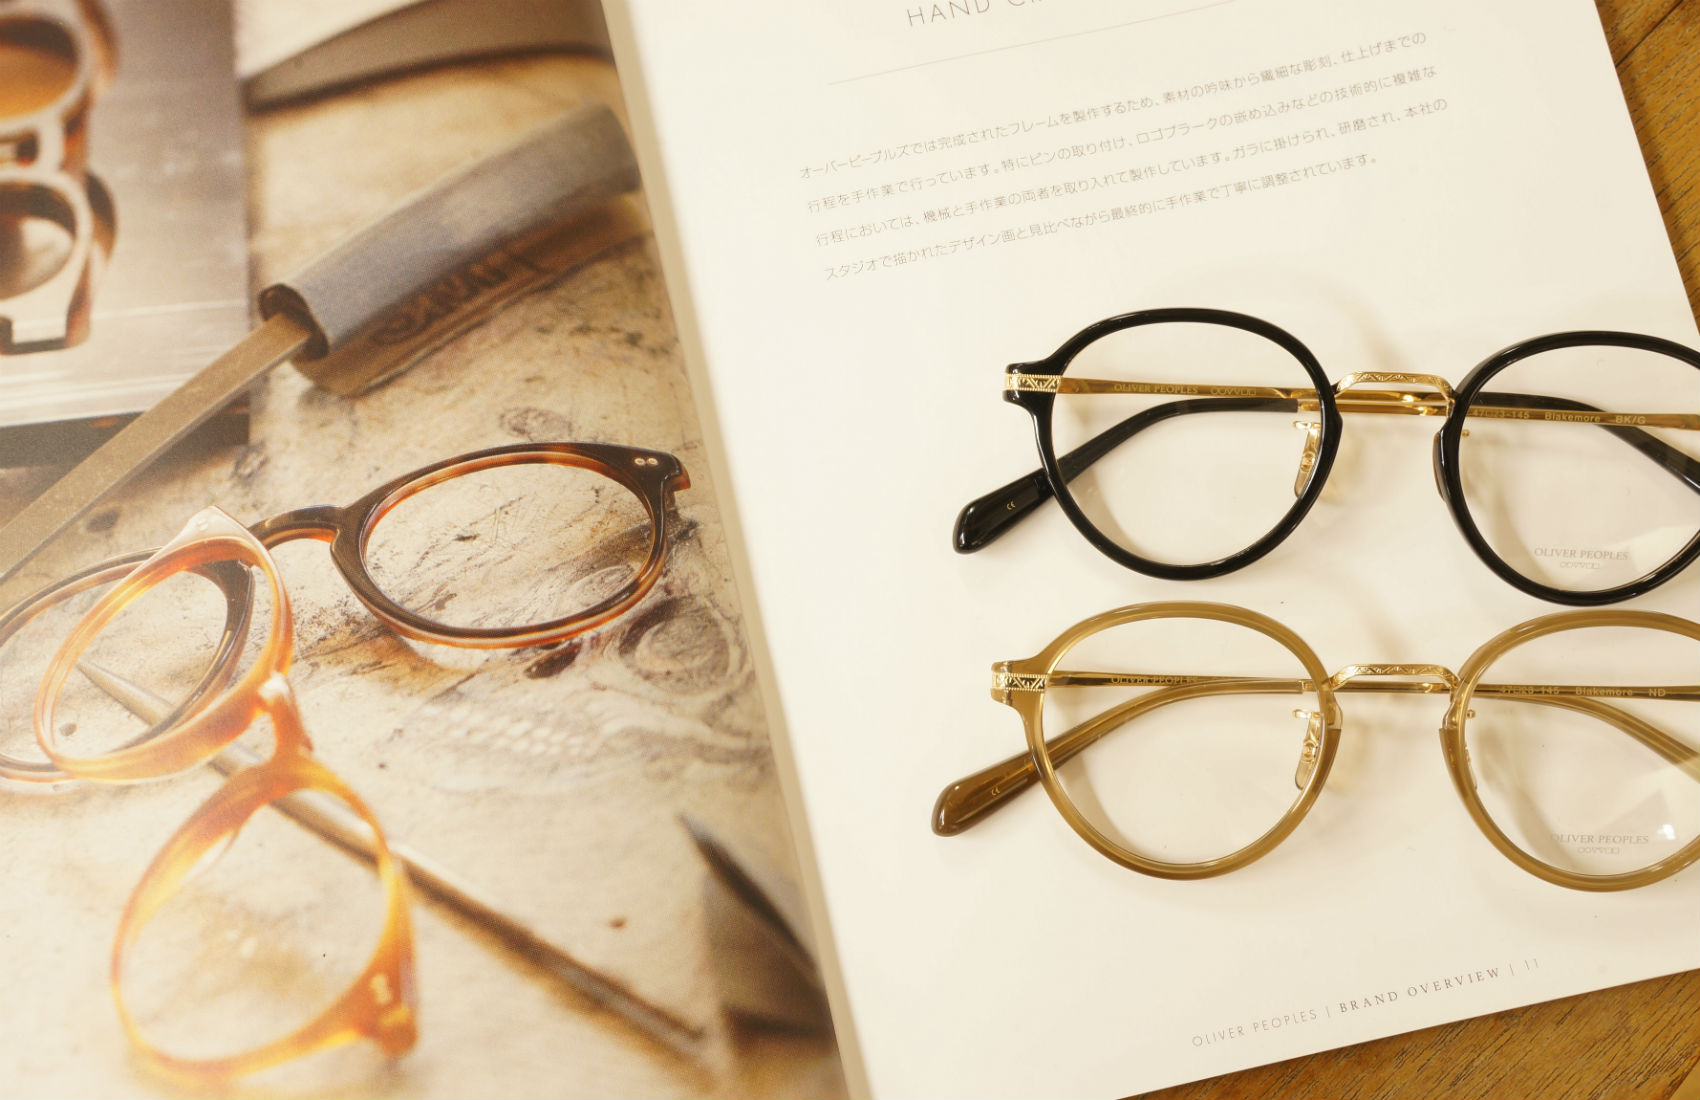 OLIVER PEOPLES Blakemore 2016ss